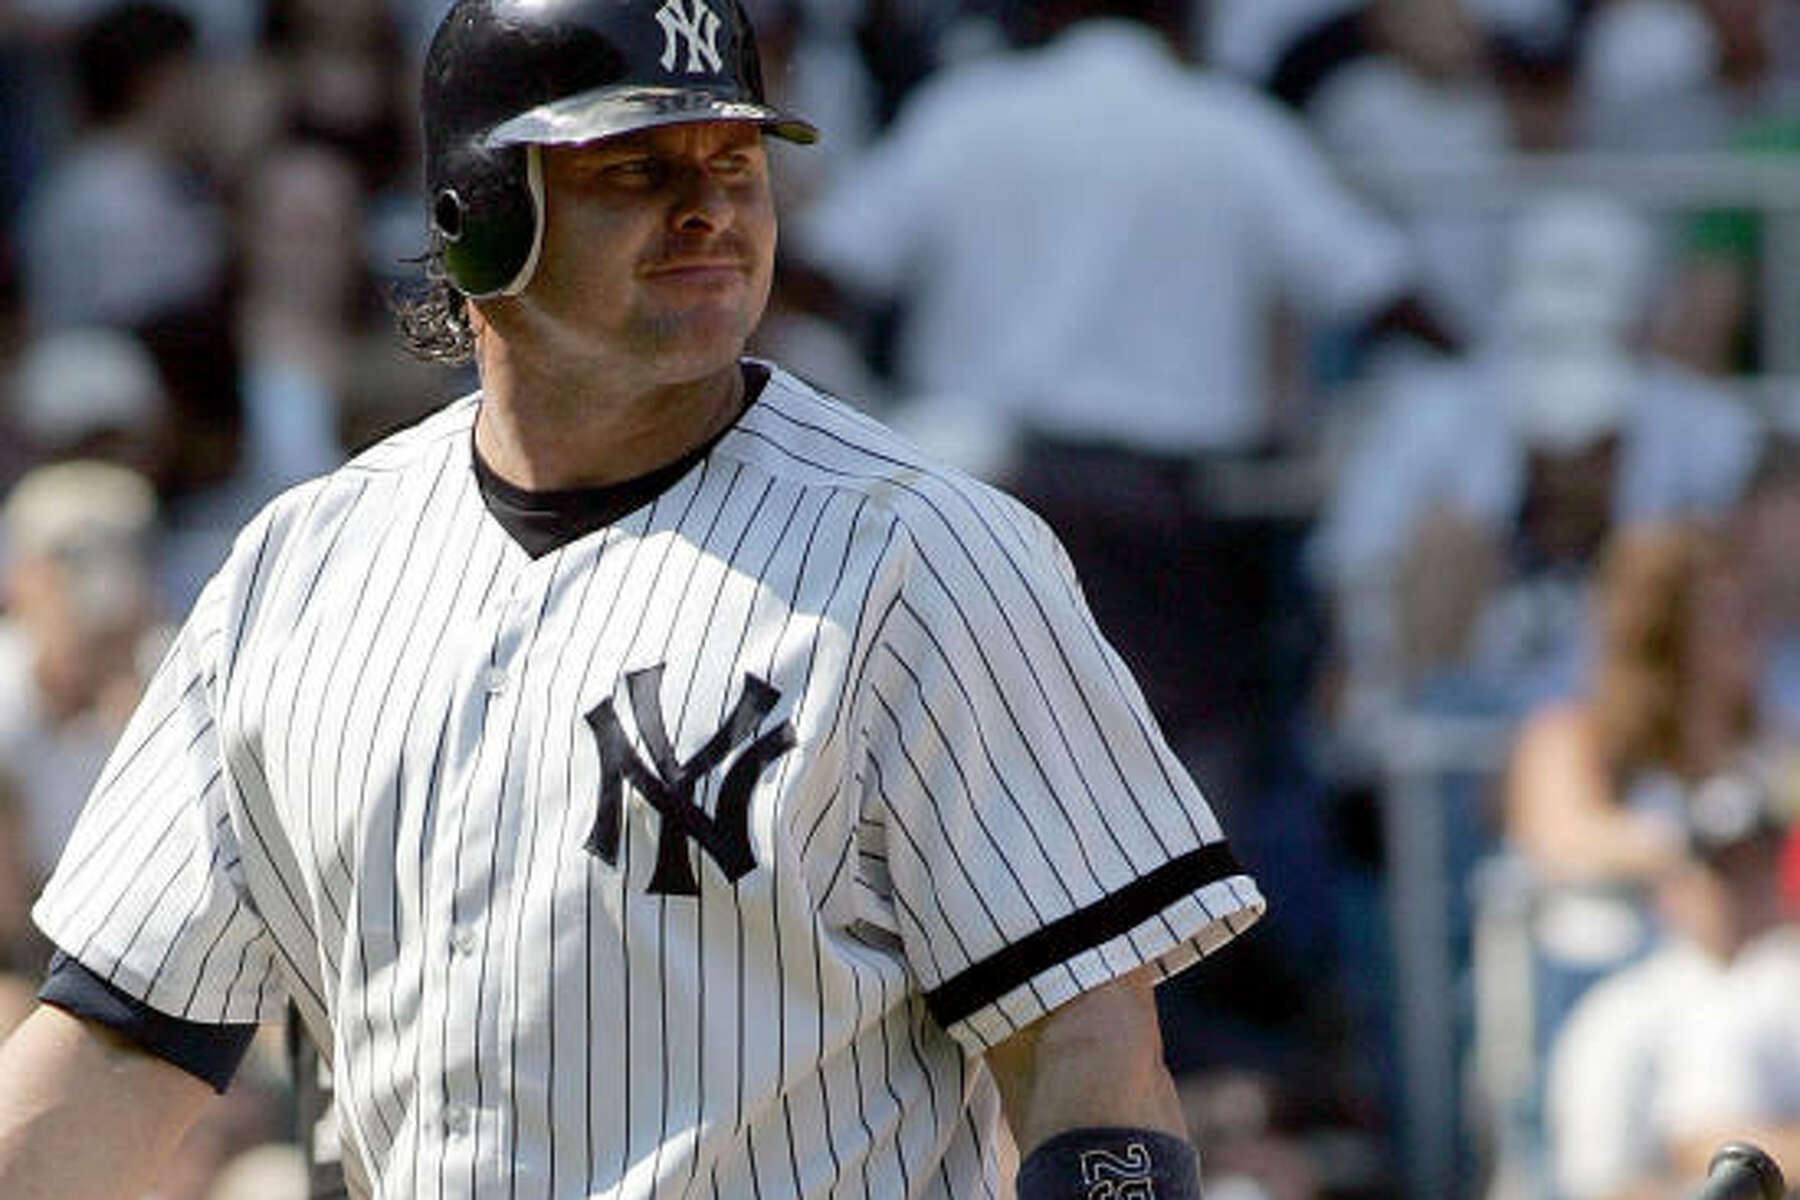 Giambi admitted taking steroids